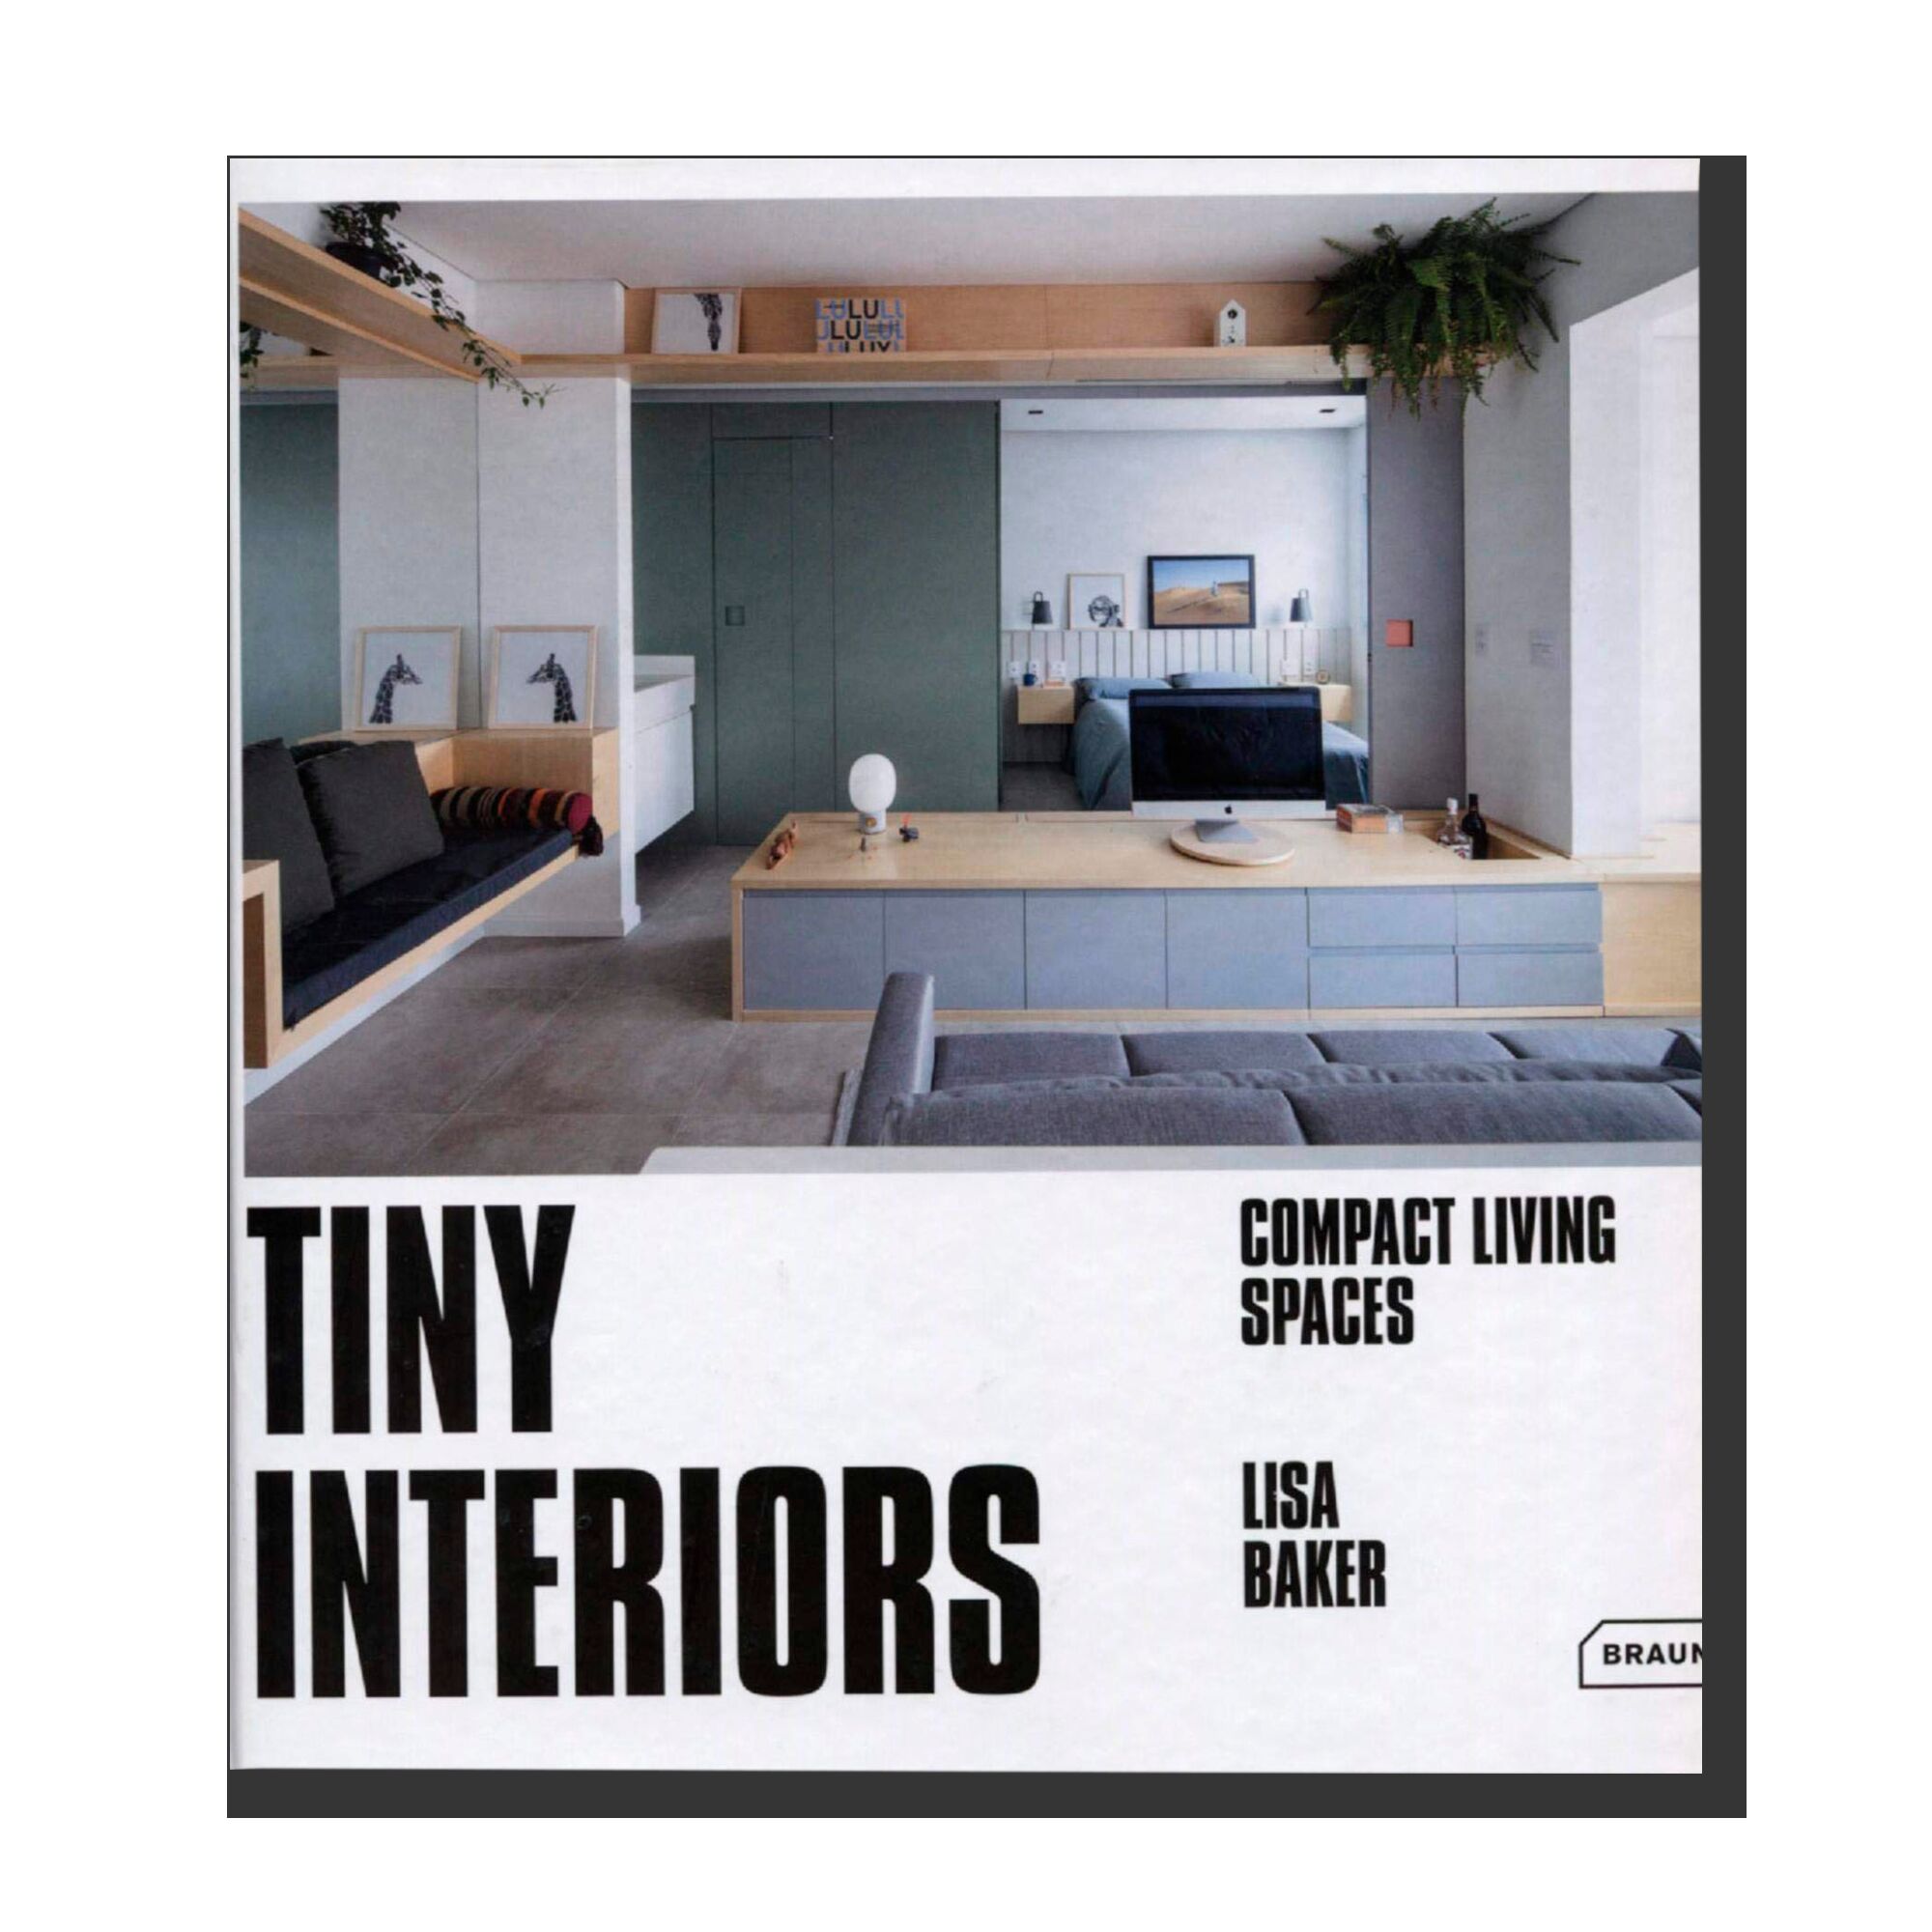 Tiny Interiors: Compact Living Spaces